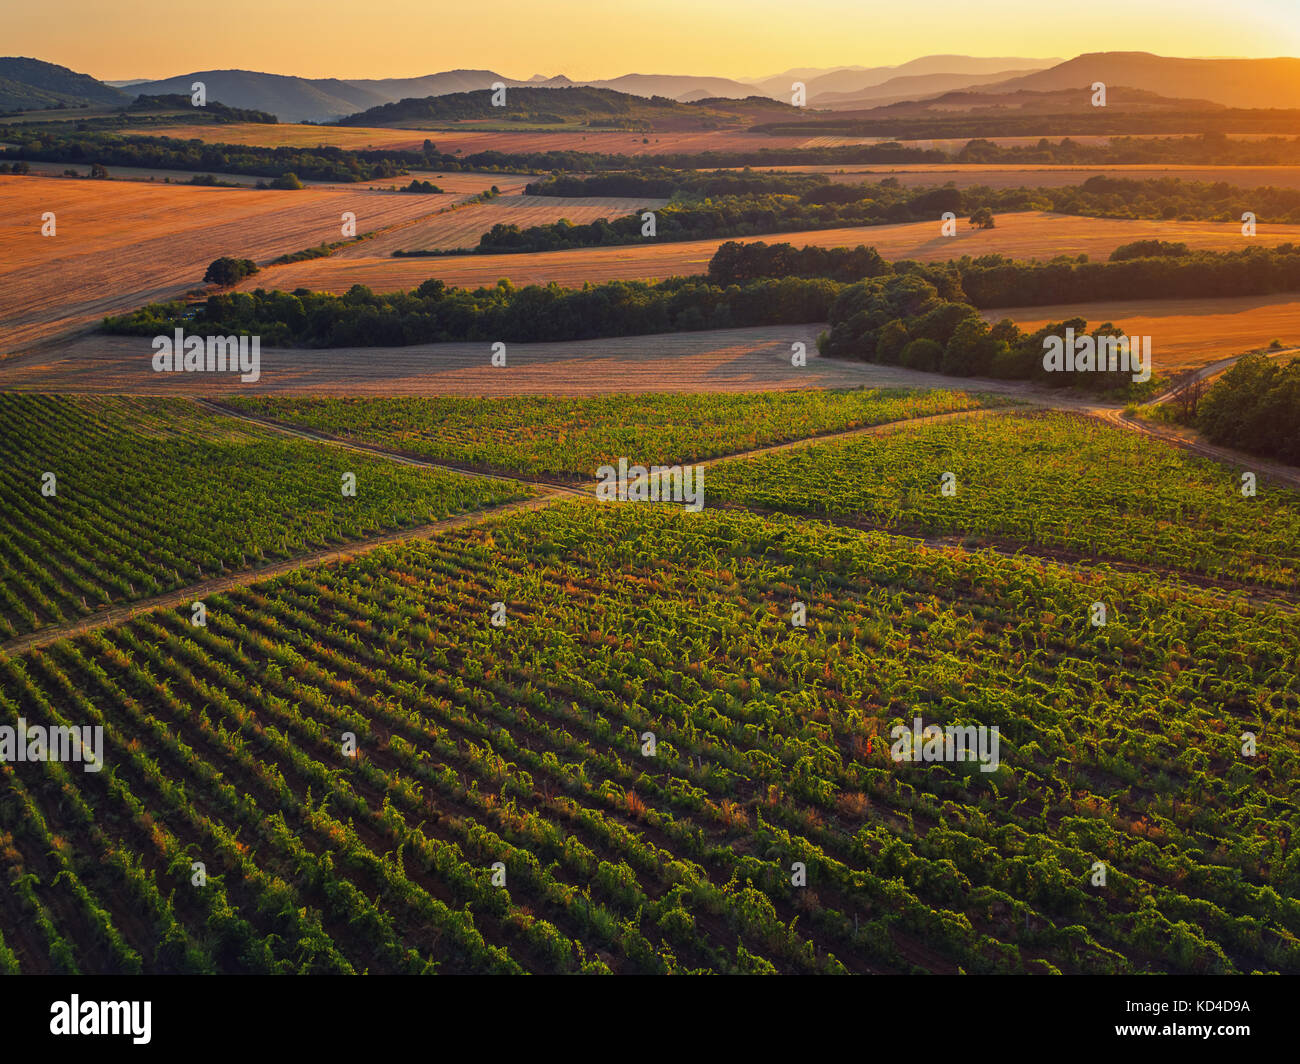 A Beautiful Sunset over vineyard in Europe. Stock Photo